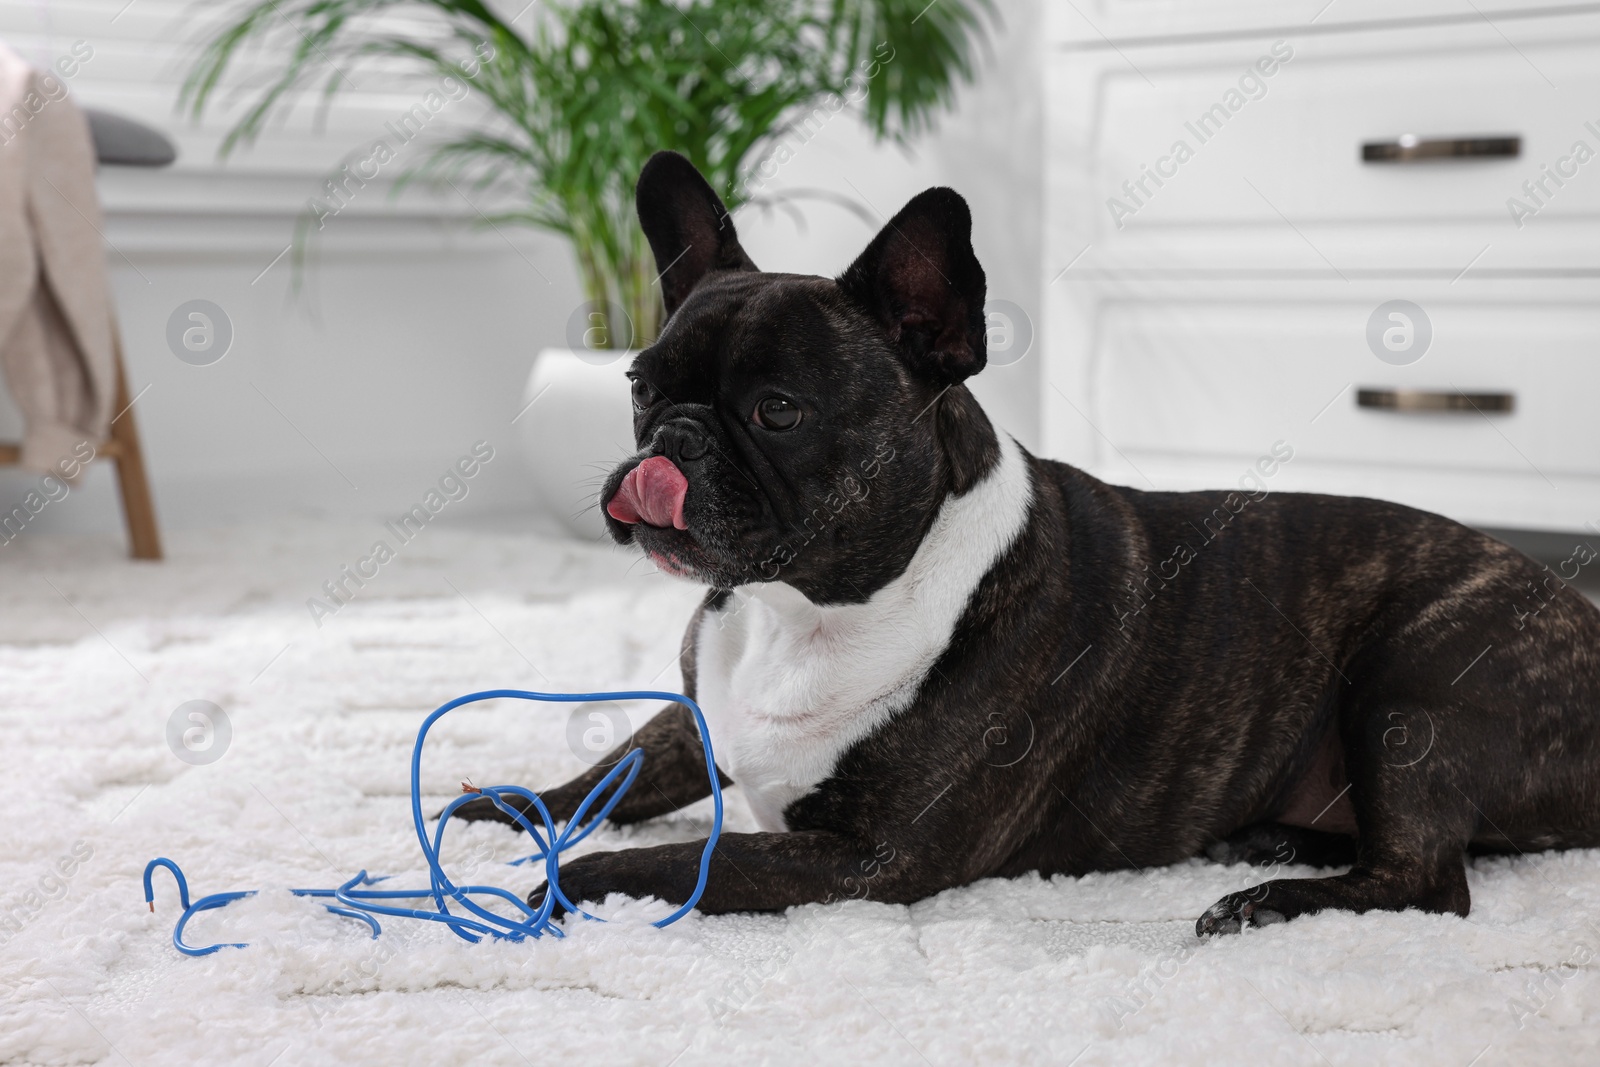 Photo of Naughty French Bulldog with electrical wire on carpet in room